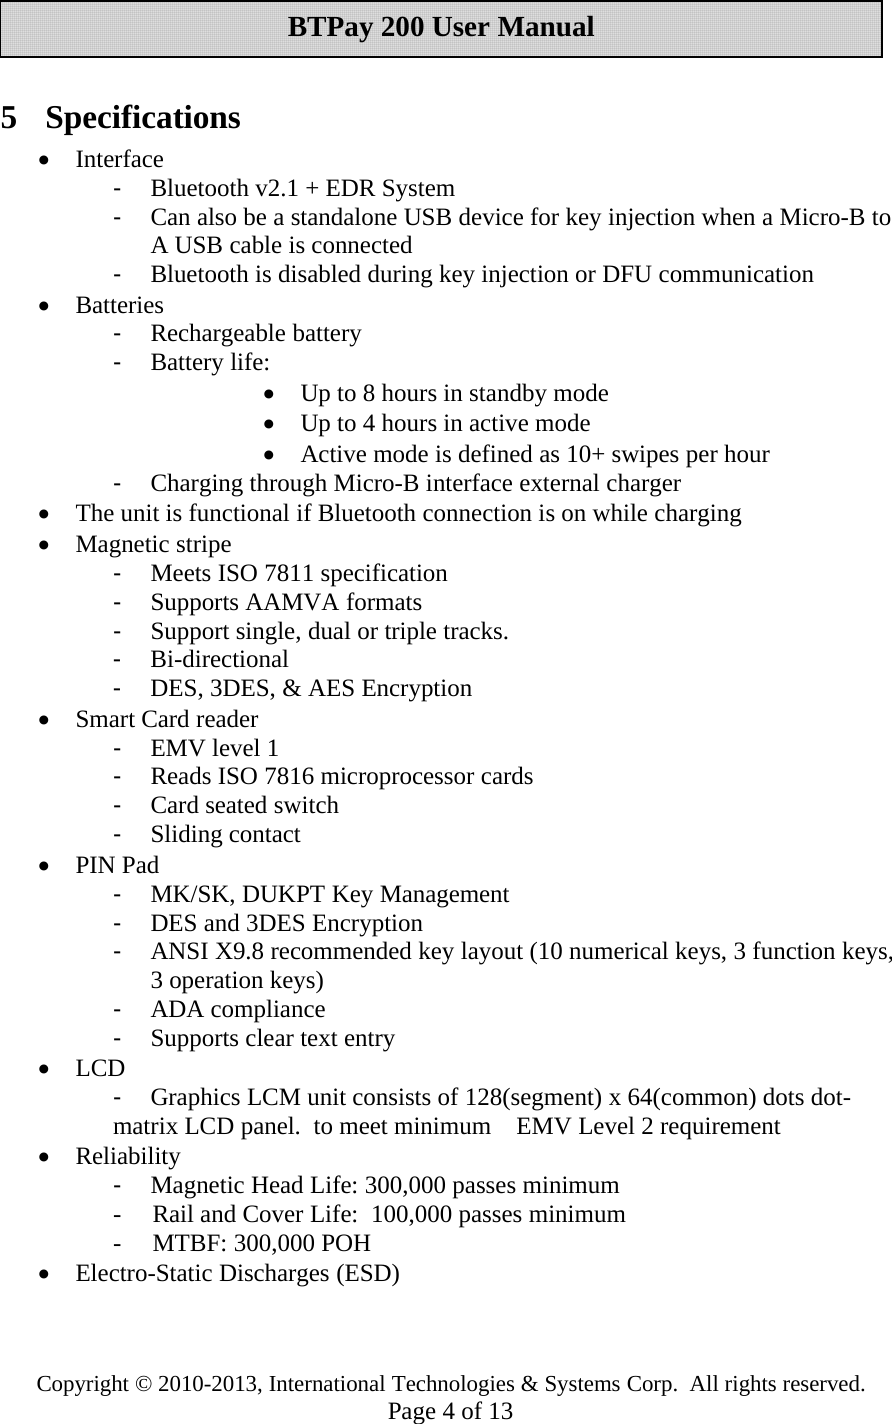 Copyright © 2010-2013, International Technologies &amp; Systems Corp. All rights reserved.Page 4of 13BTPay 200 User Manual5 Specifications•Interface-Bluetooth v2.1 + EDRSystem-Can alsobe a standalone USB device for key injection when a Micro-B toA USB cable is connected-Bluetooth is disabled during key injection or DFU communication•Batteries-Rechargeable battery-Battery life:•Up to 8 hours in standby mode•Up to 4 hours in active mode•Active mode is defined as 10+ swipes perhour-Charging through Micro-B interface external charger•The unit is functional if Bluetooth connection is on while charging•Magnetic stripe-Meets ISO 7811 specification-Supports AAMVA formats-Support single, dual ortriple tracks.-Bi-directional-DES, 3DES, &amp; AES Encryption•Smart Card reader-EMV level 1-Reads ISO 7816 microprocessor cards-Cardseated switch-Sliding contact•PIN Pad-MK/SK, DUKPT Key Management-DES and 3DES Encryption-ANSI X9.8 recommendedkey layout (10 numerical keys, 3 function keys,3 operation keys)-ADA compliance-Supports cleartext entry•LCD-Graphics LCM unit consists of 128(segment) x 64(common) dots dot-matrix LCD panel. to meet minimum EMV Level 2 requirement•Reliability-Magnetic HeadLife: 300,000 passes minimum- Rail and Cover Life: 100,000 passes minimum- MTBF: 300,000 POH•Electro-Static Discharges (ESD)